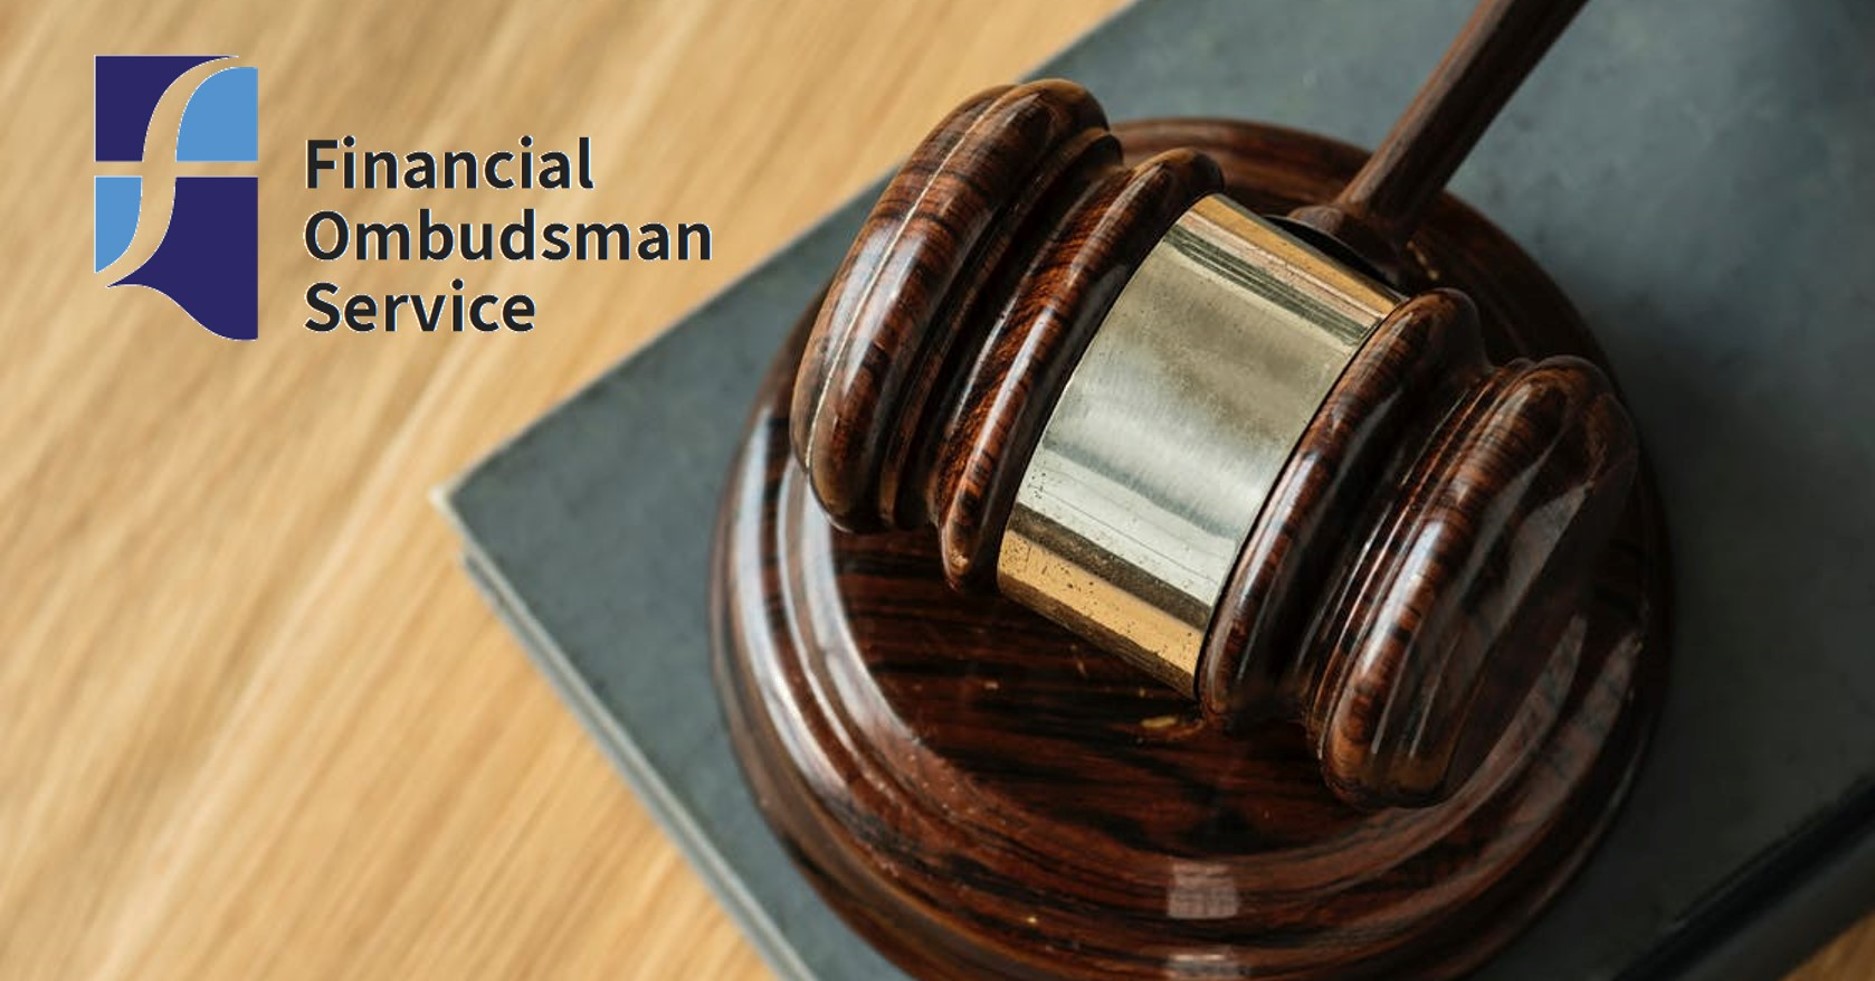 Financial adviser to compensate client after mis-sold SIPP advice